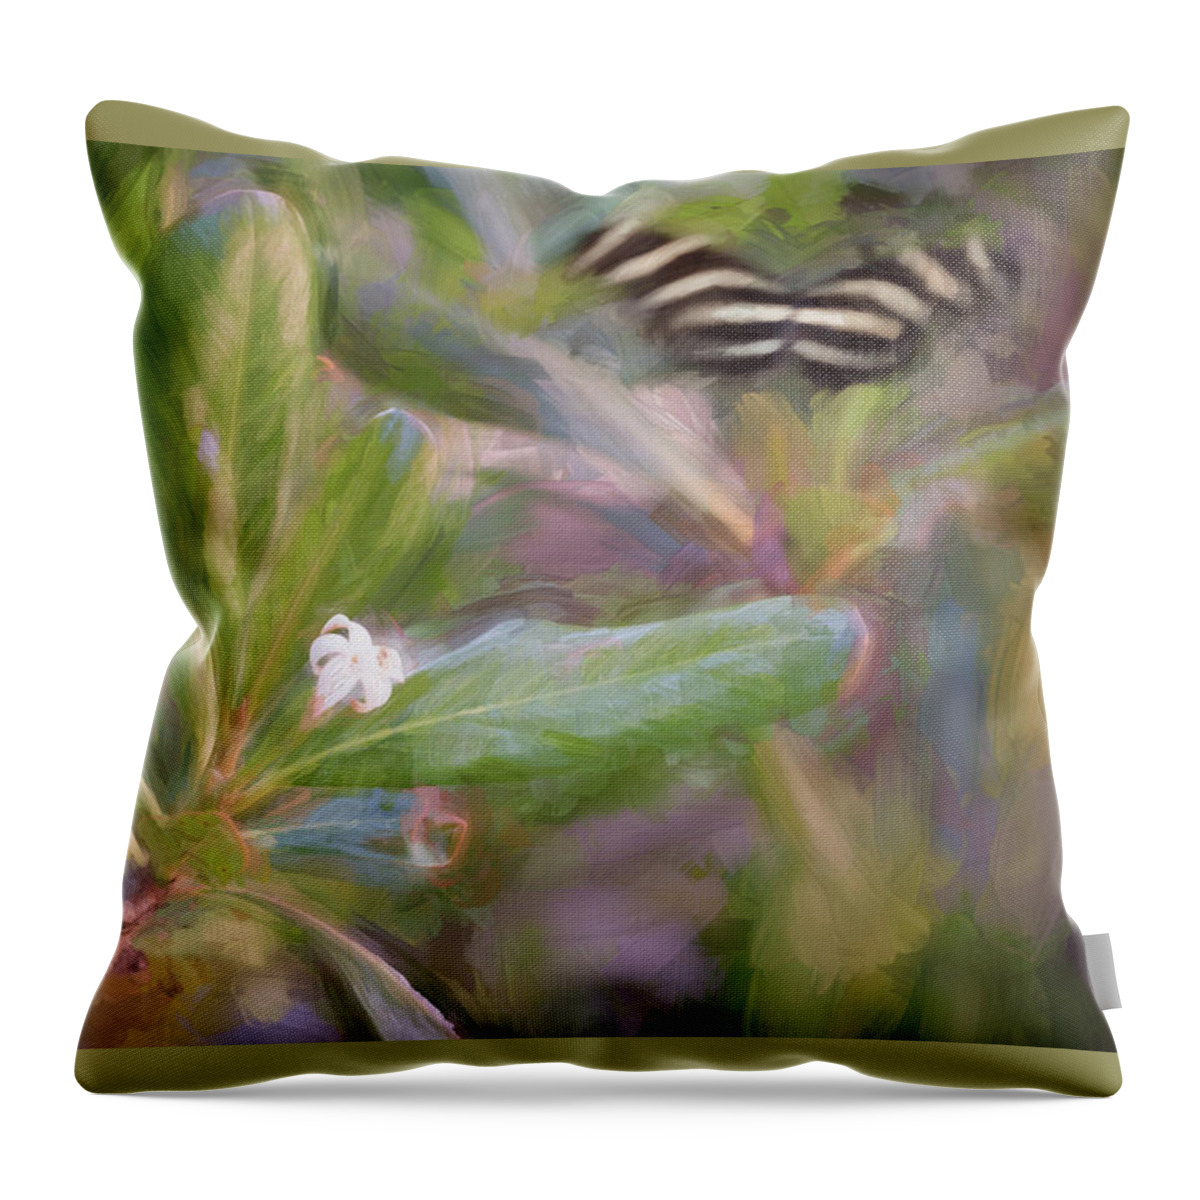 Butterfly Throw Pillow featuring the photograph Painterly Zebra Butterfly by Artful Imagery